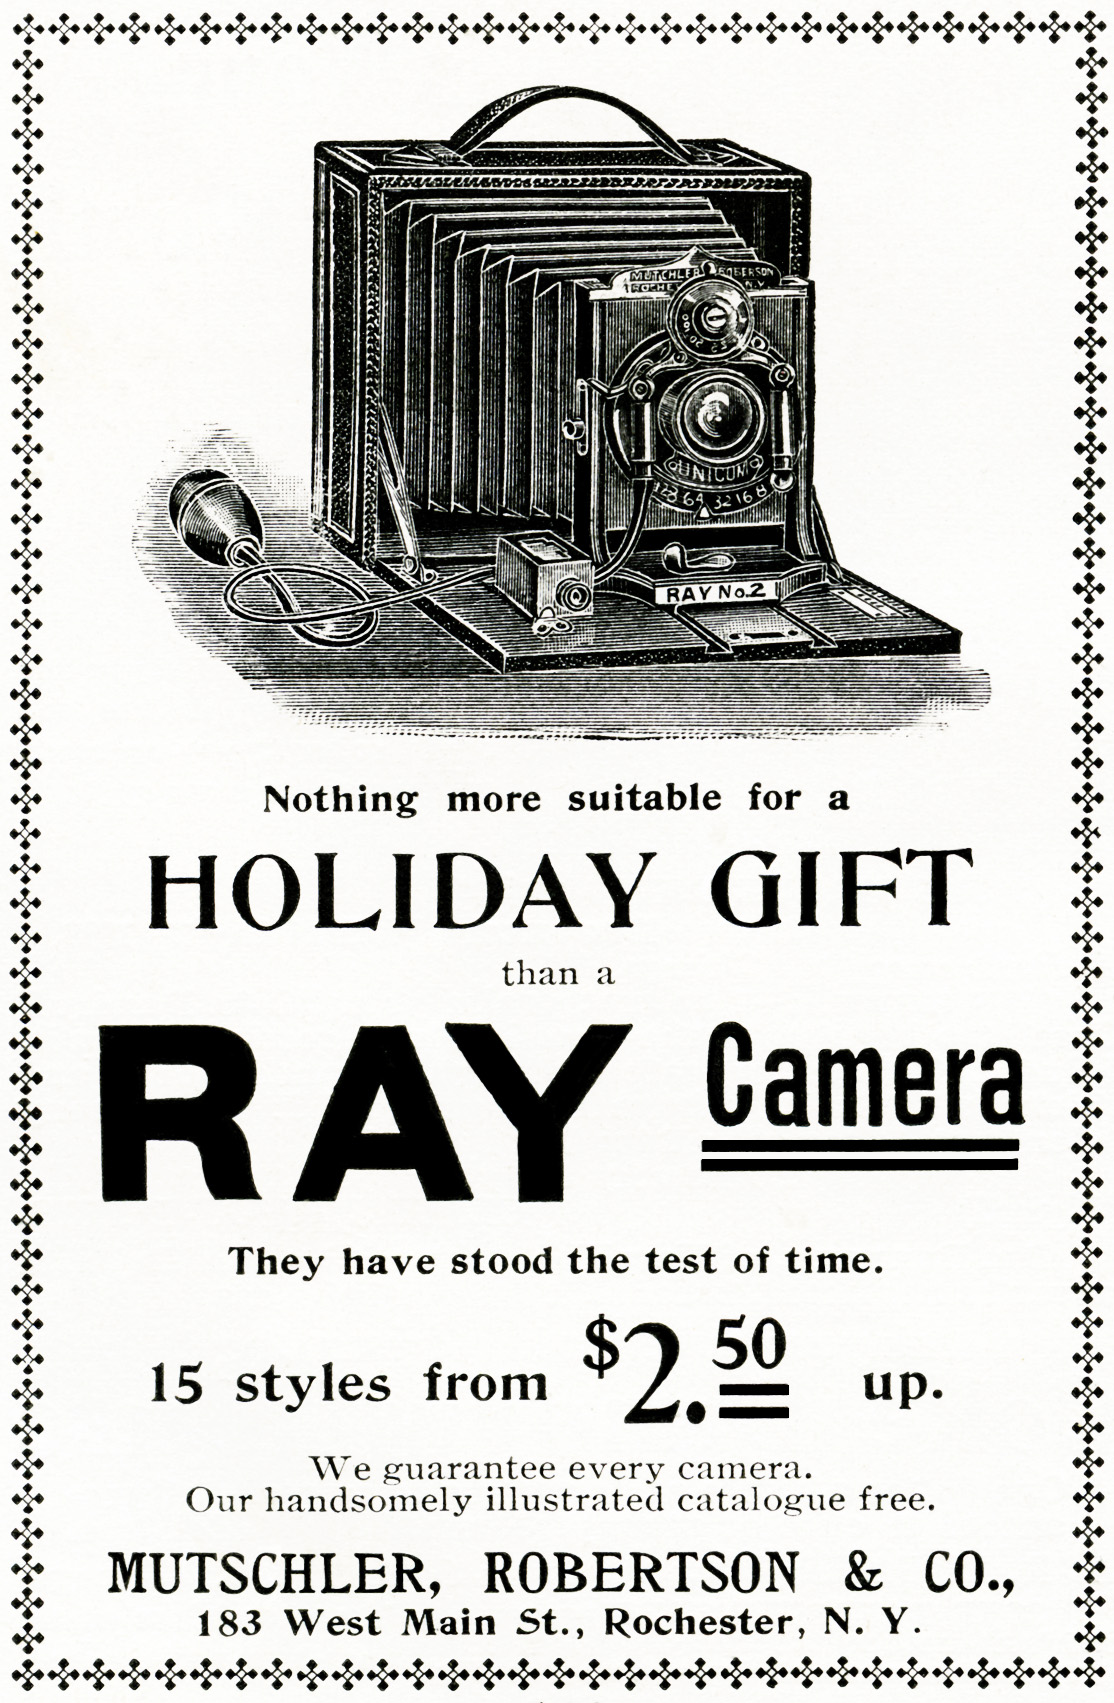 ray camera advertisement, vintage clipart camera, free vintage image, vintage advertisement camera, antique camera, free printable holiday gift, antique magazine advertising